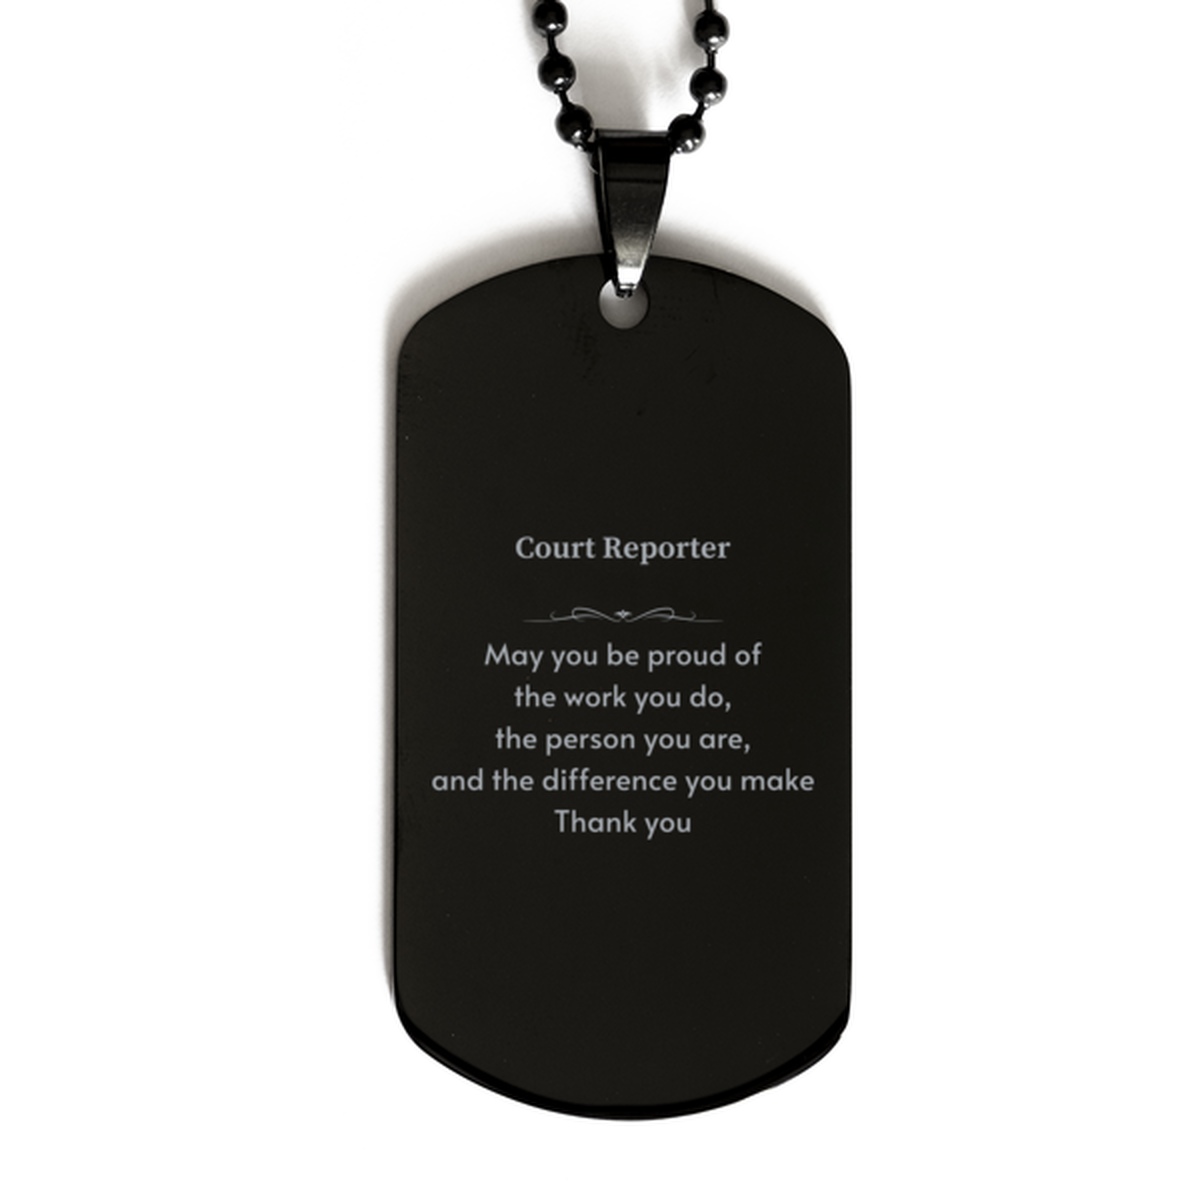 Heartwarming Black Dog Tag Retirement Coworkers Gifts for Court Reporter, Court Reporter May You be proud of the work you do, the person you are Gifts for Boss Men Women Friends